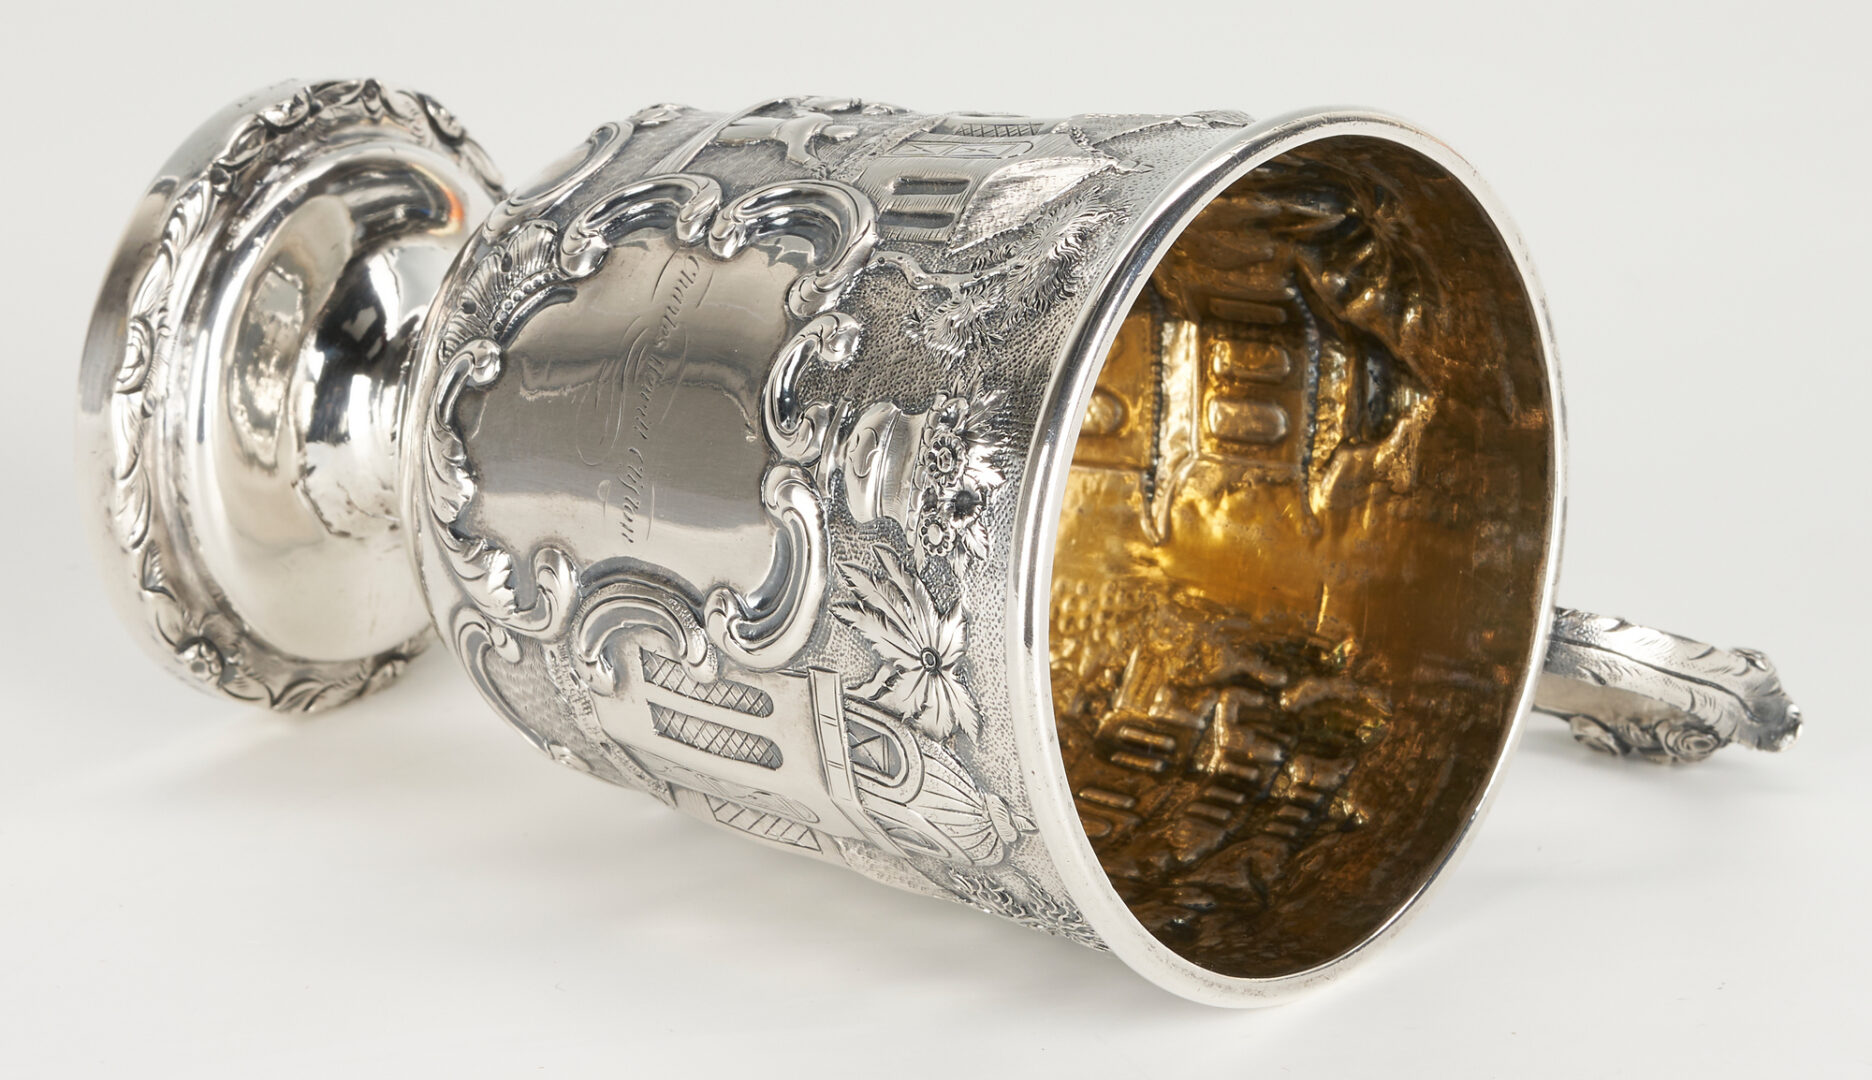 Lot 84: George Stewart KY Chinoiserie Coin Silver Cup